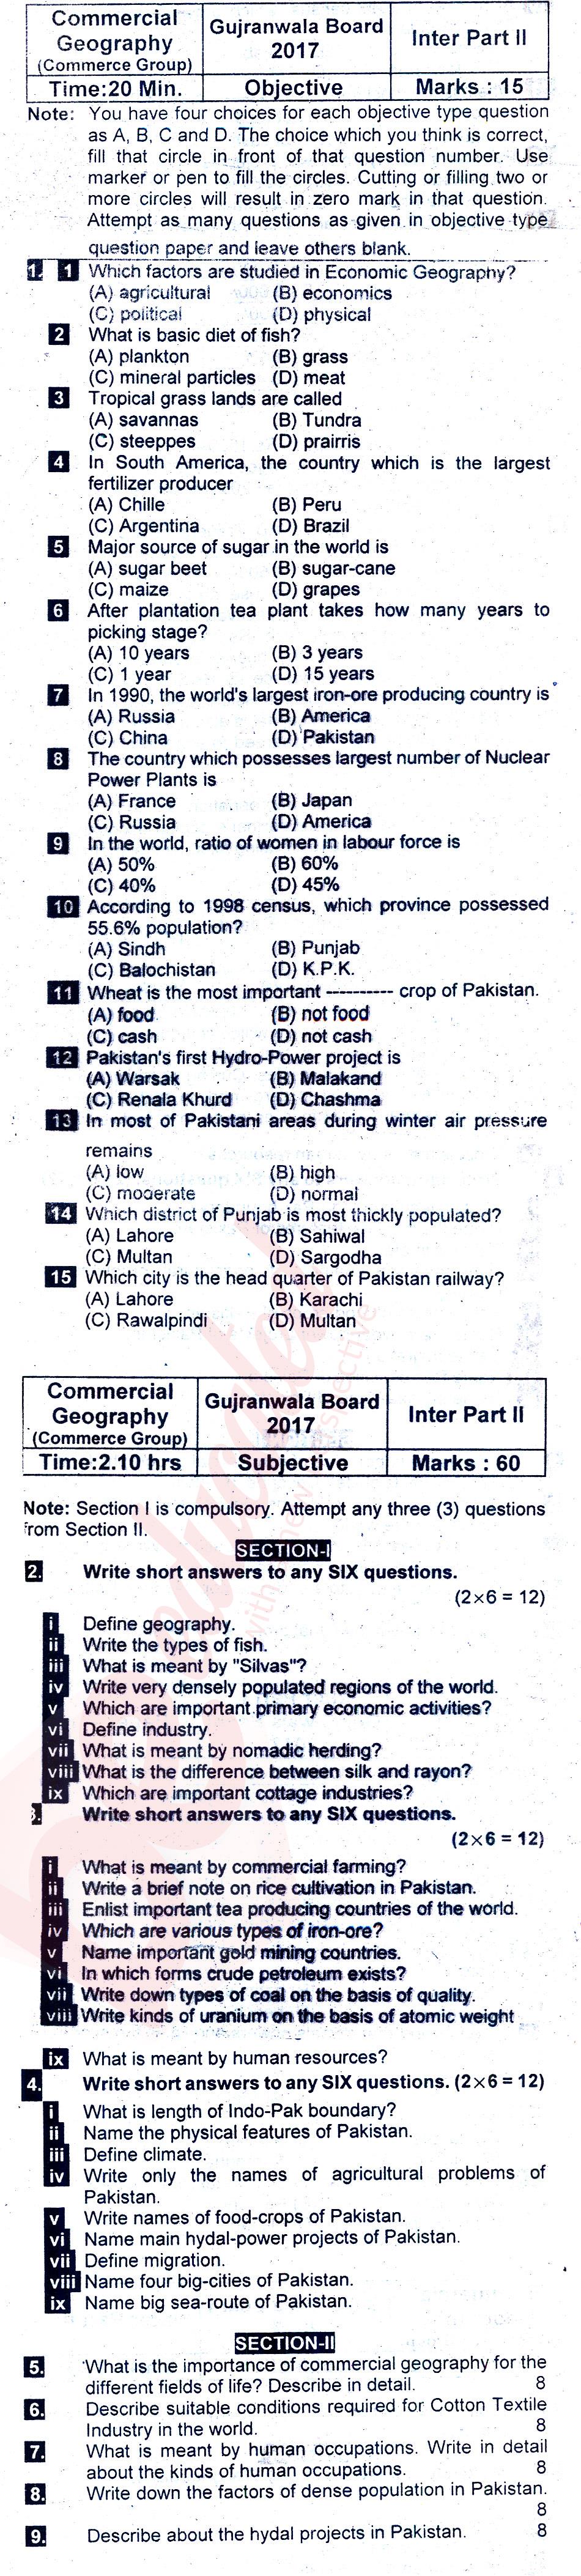 Commercial Geography ICOM Part 2 Past Paper Group 1 BISE Gujranwala 2017